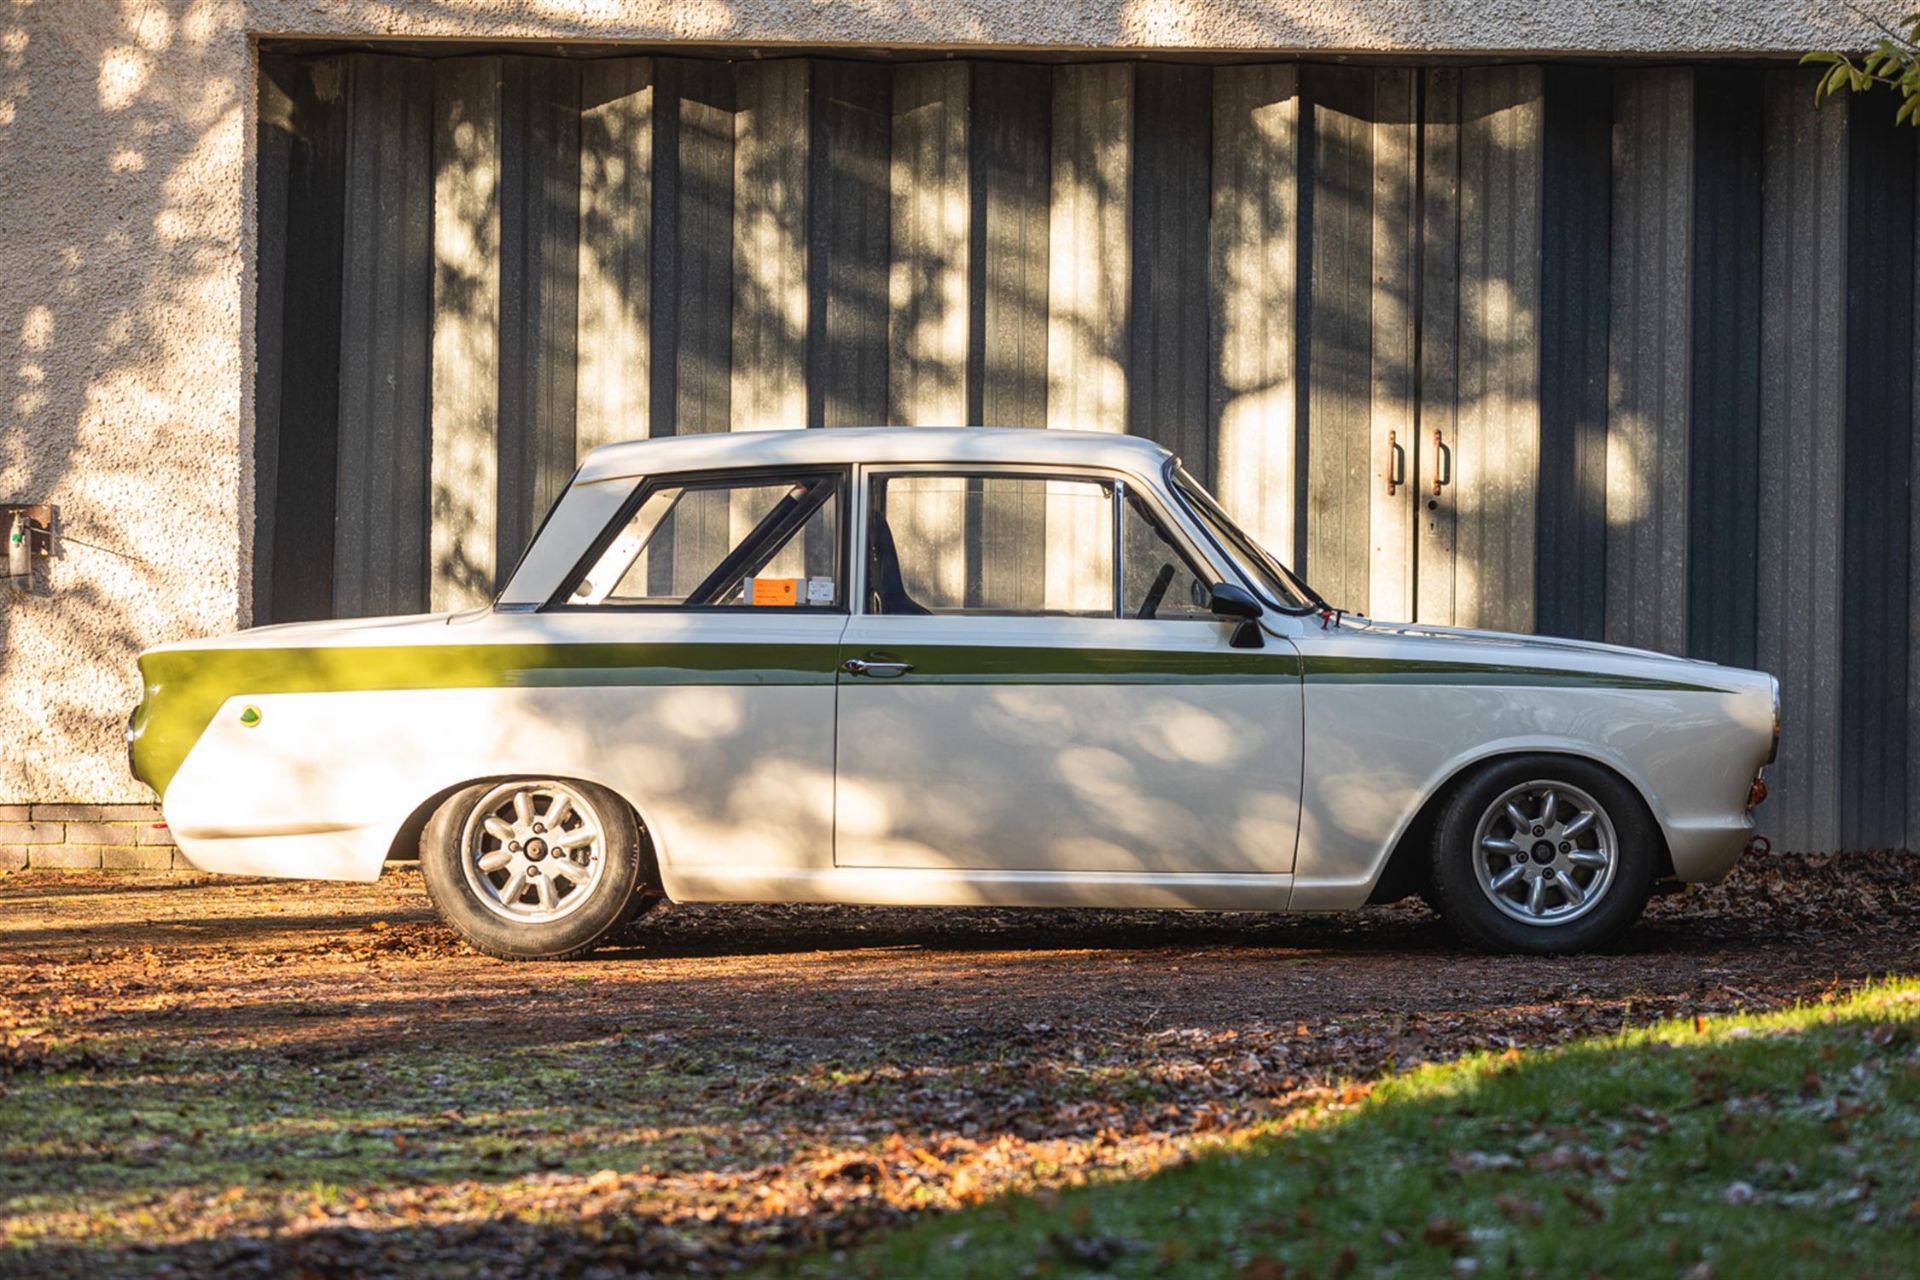 1964 Ford Lotus Cortina Competition Car - Image 5 of 10